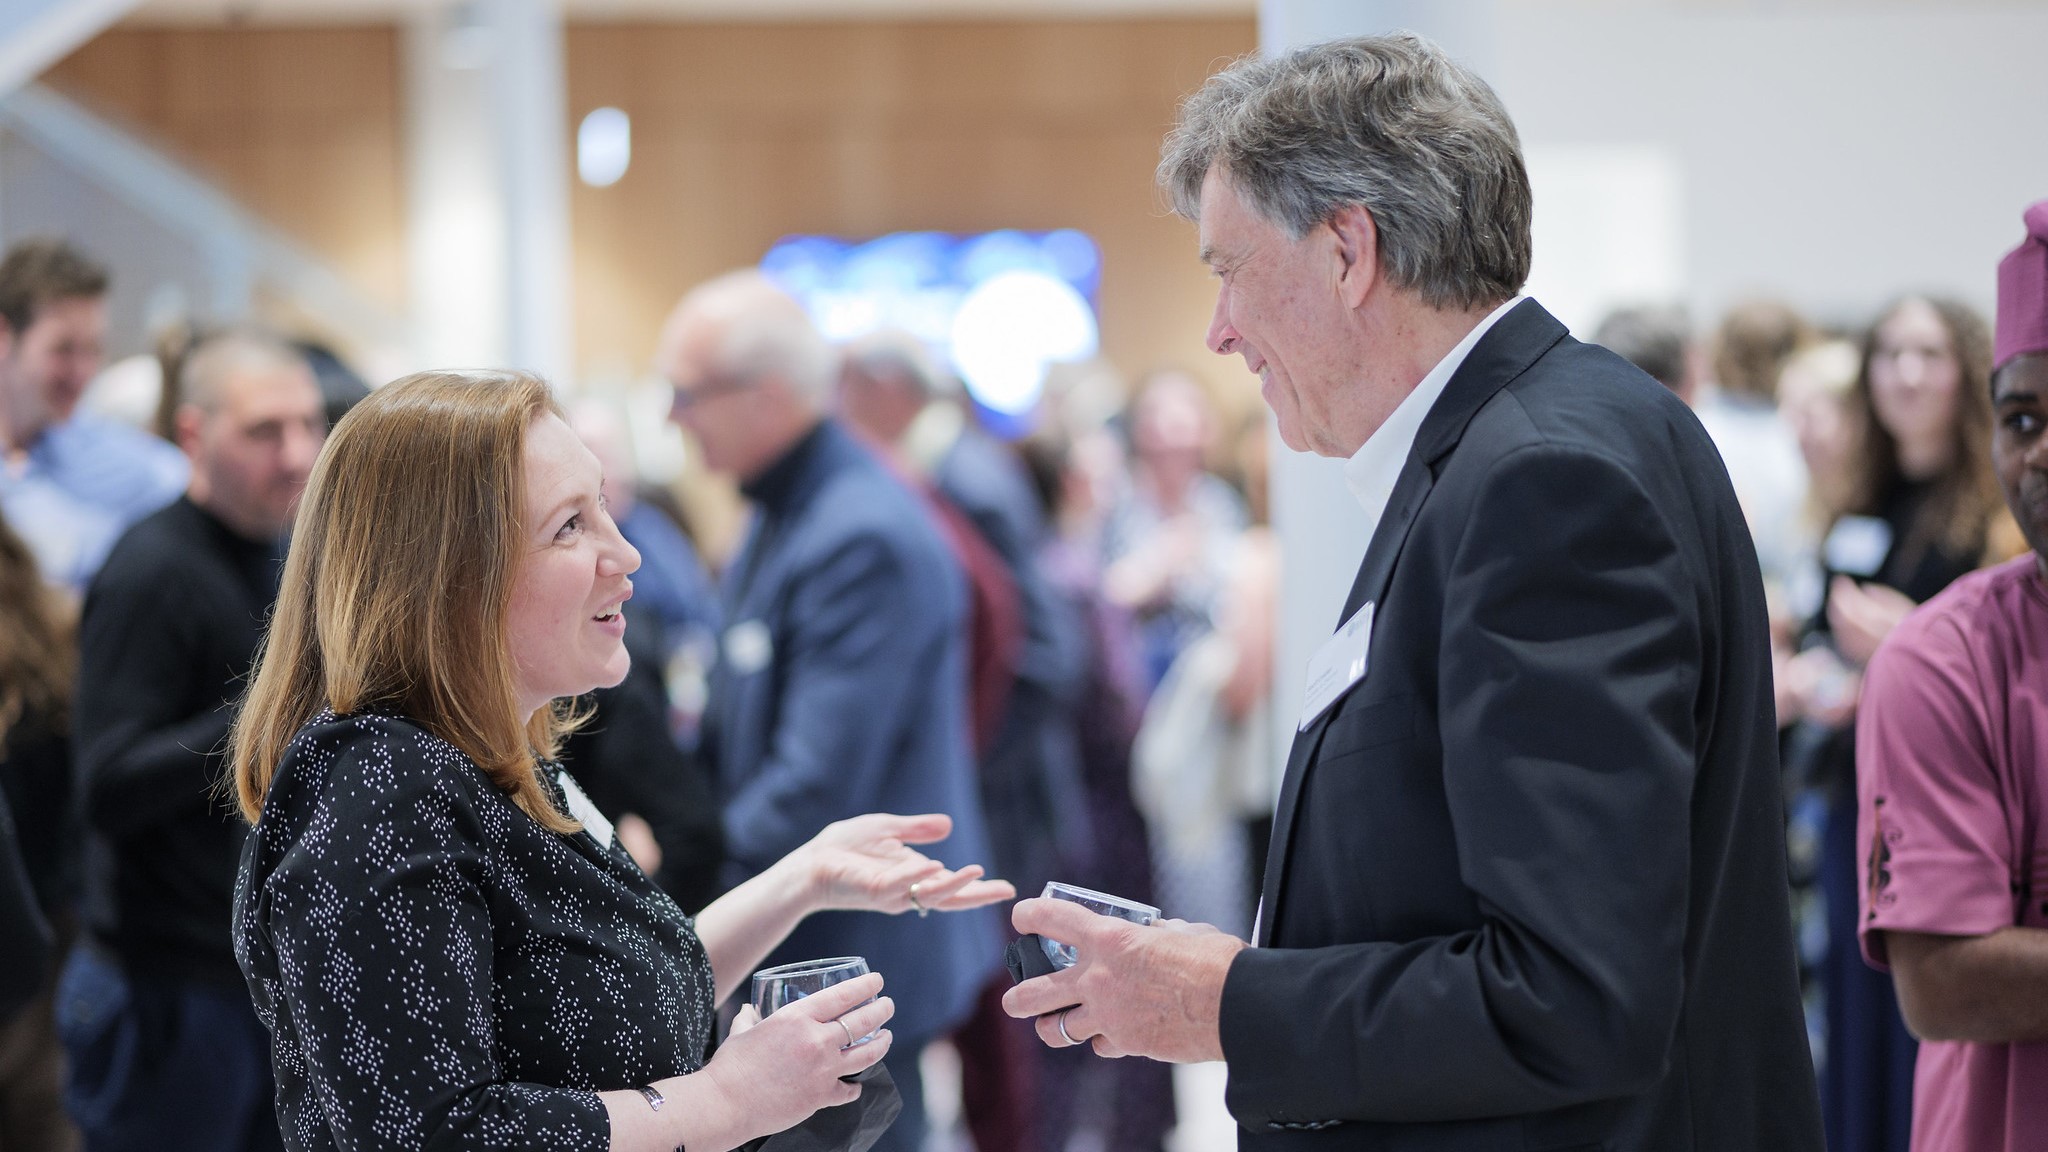 A smartly dressed man and a woman in conversation at an event